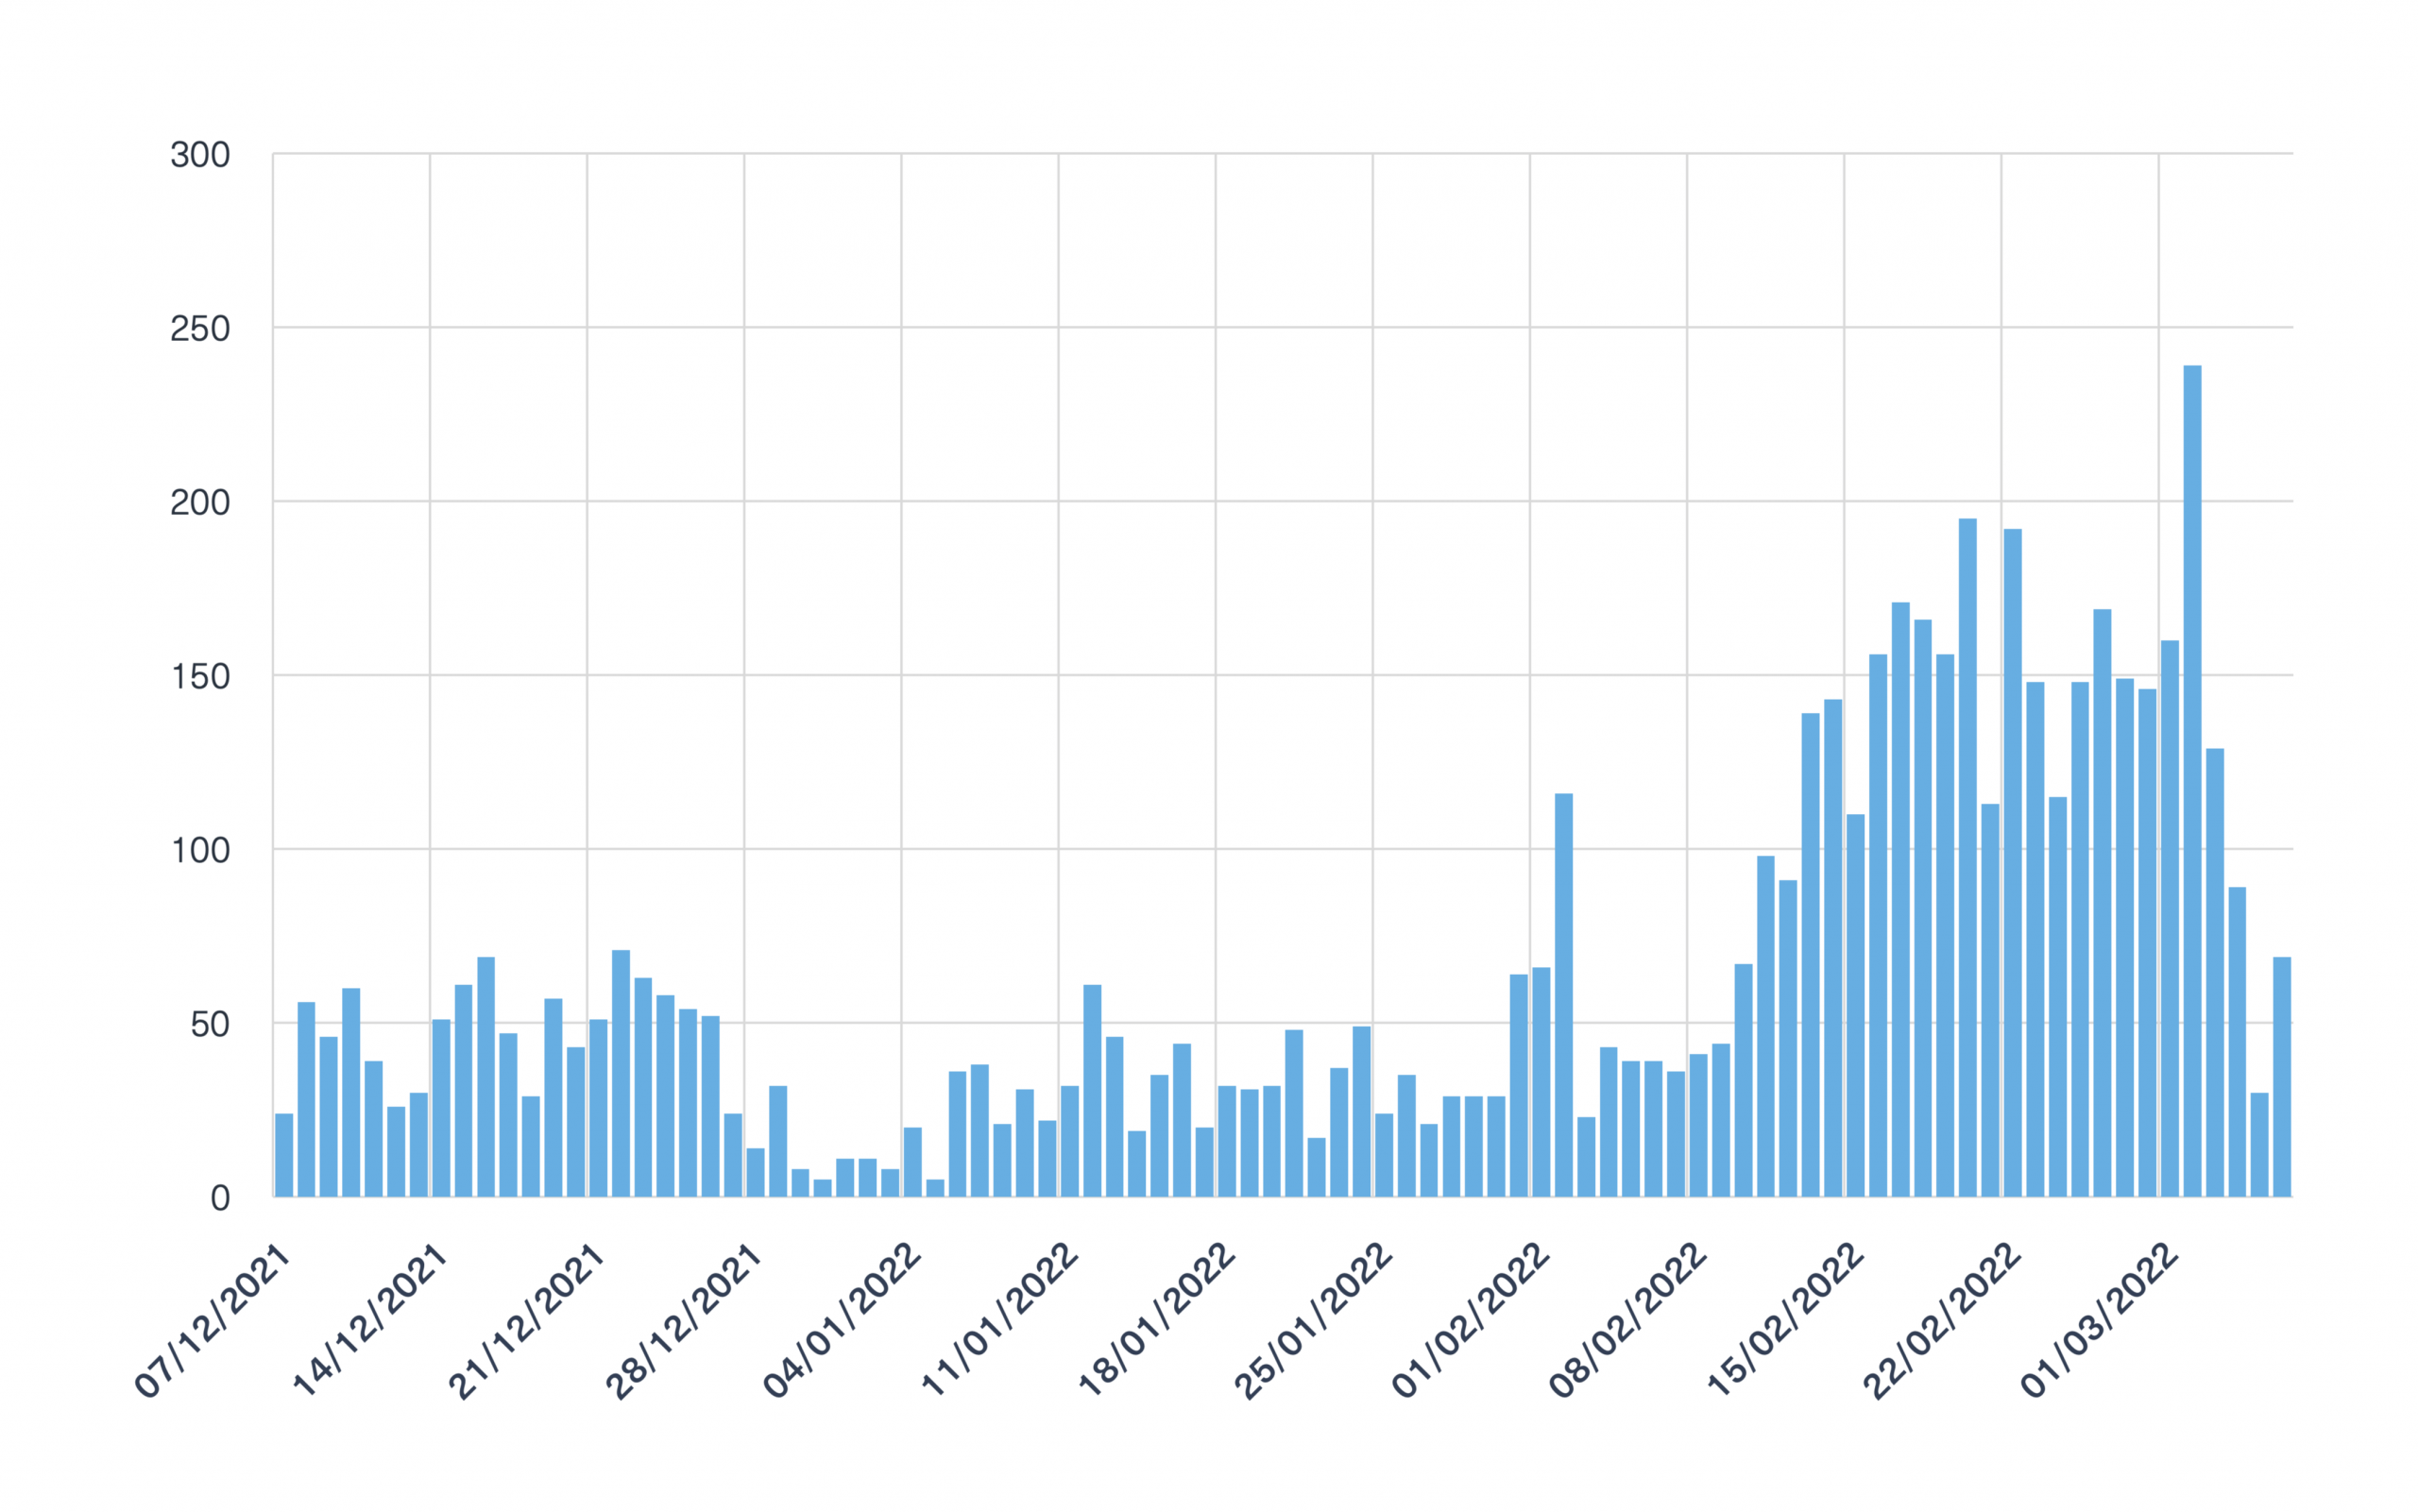 The number of mentions of Russian IPs over from December 2021 until March 2022